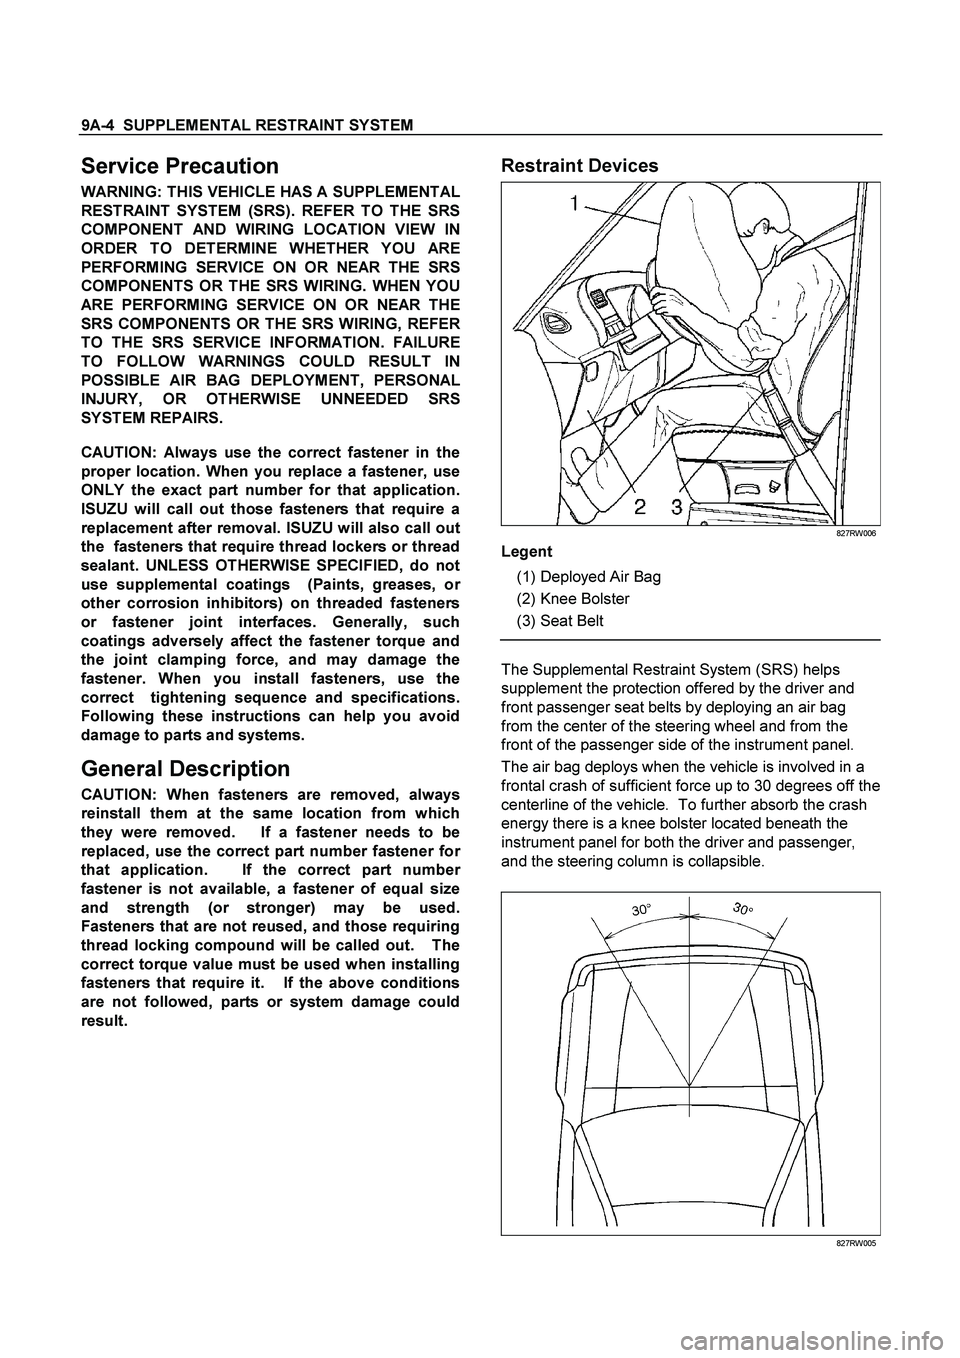 ISUZU TF SERIES 2004  Workshop Manual 9A-4  SUPPLEMENTAL RESTRAINT SYSTEM
 
Service Precaution 
WARNING: THIS VEHICLE HAS A SUPPLEMENTAL 
RESTRAINT SYSTEM (SRS). REFER TO THE SRS 
COMPONENT AND WIRING LOCATION VIEW IN 
ORDER TO DETERMINE 